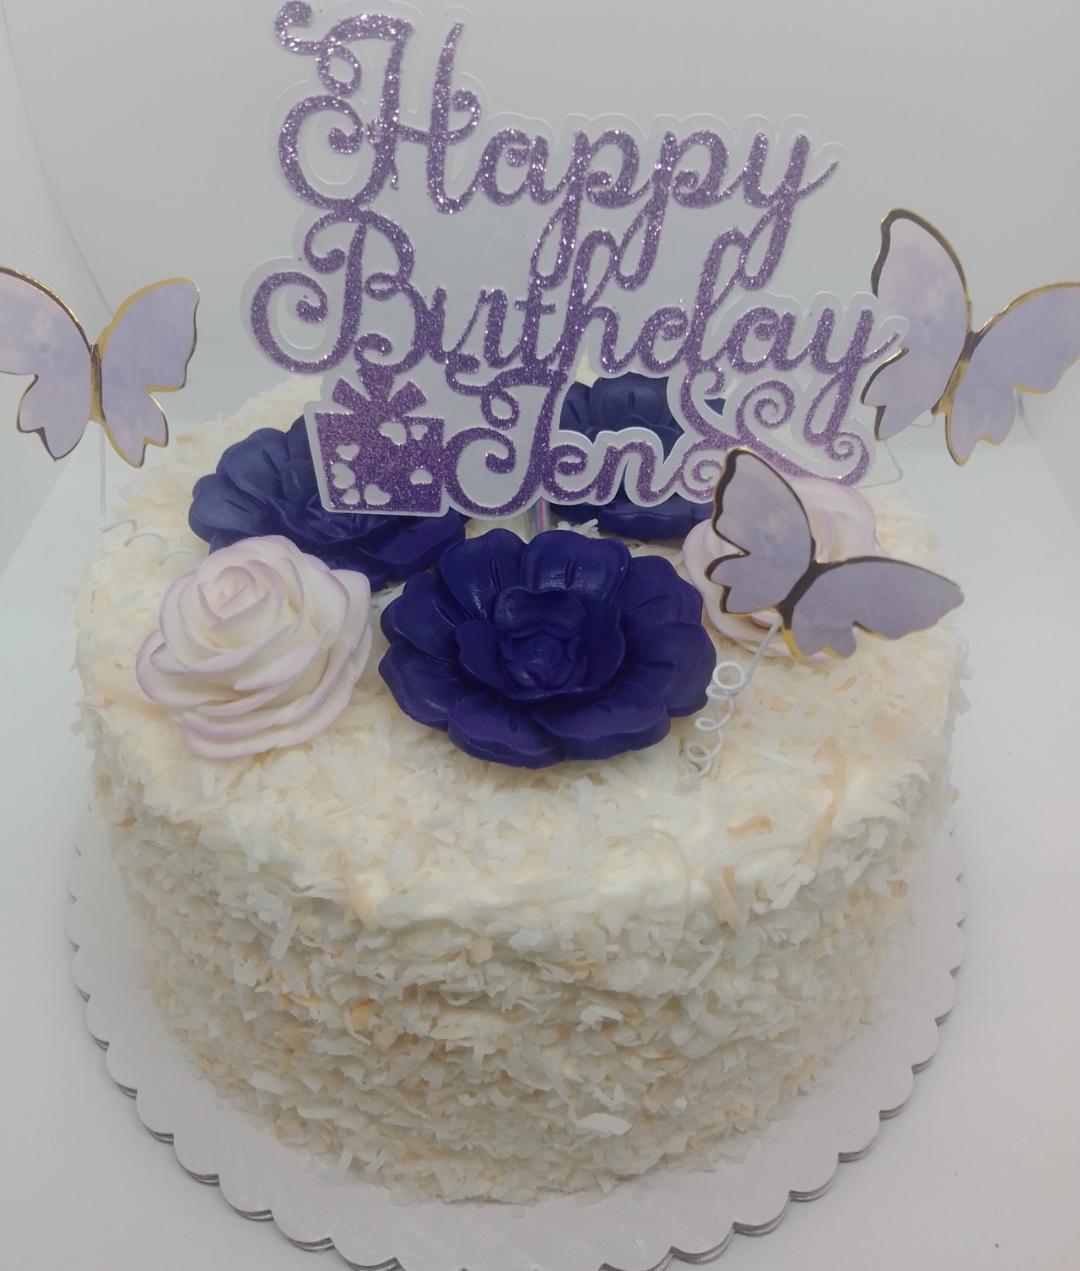 Custom Celebration Cakes (local delivery and pick-up only)